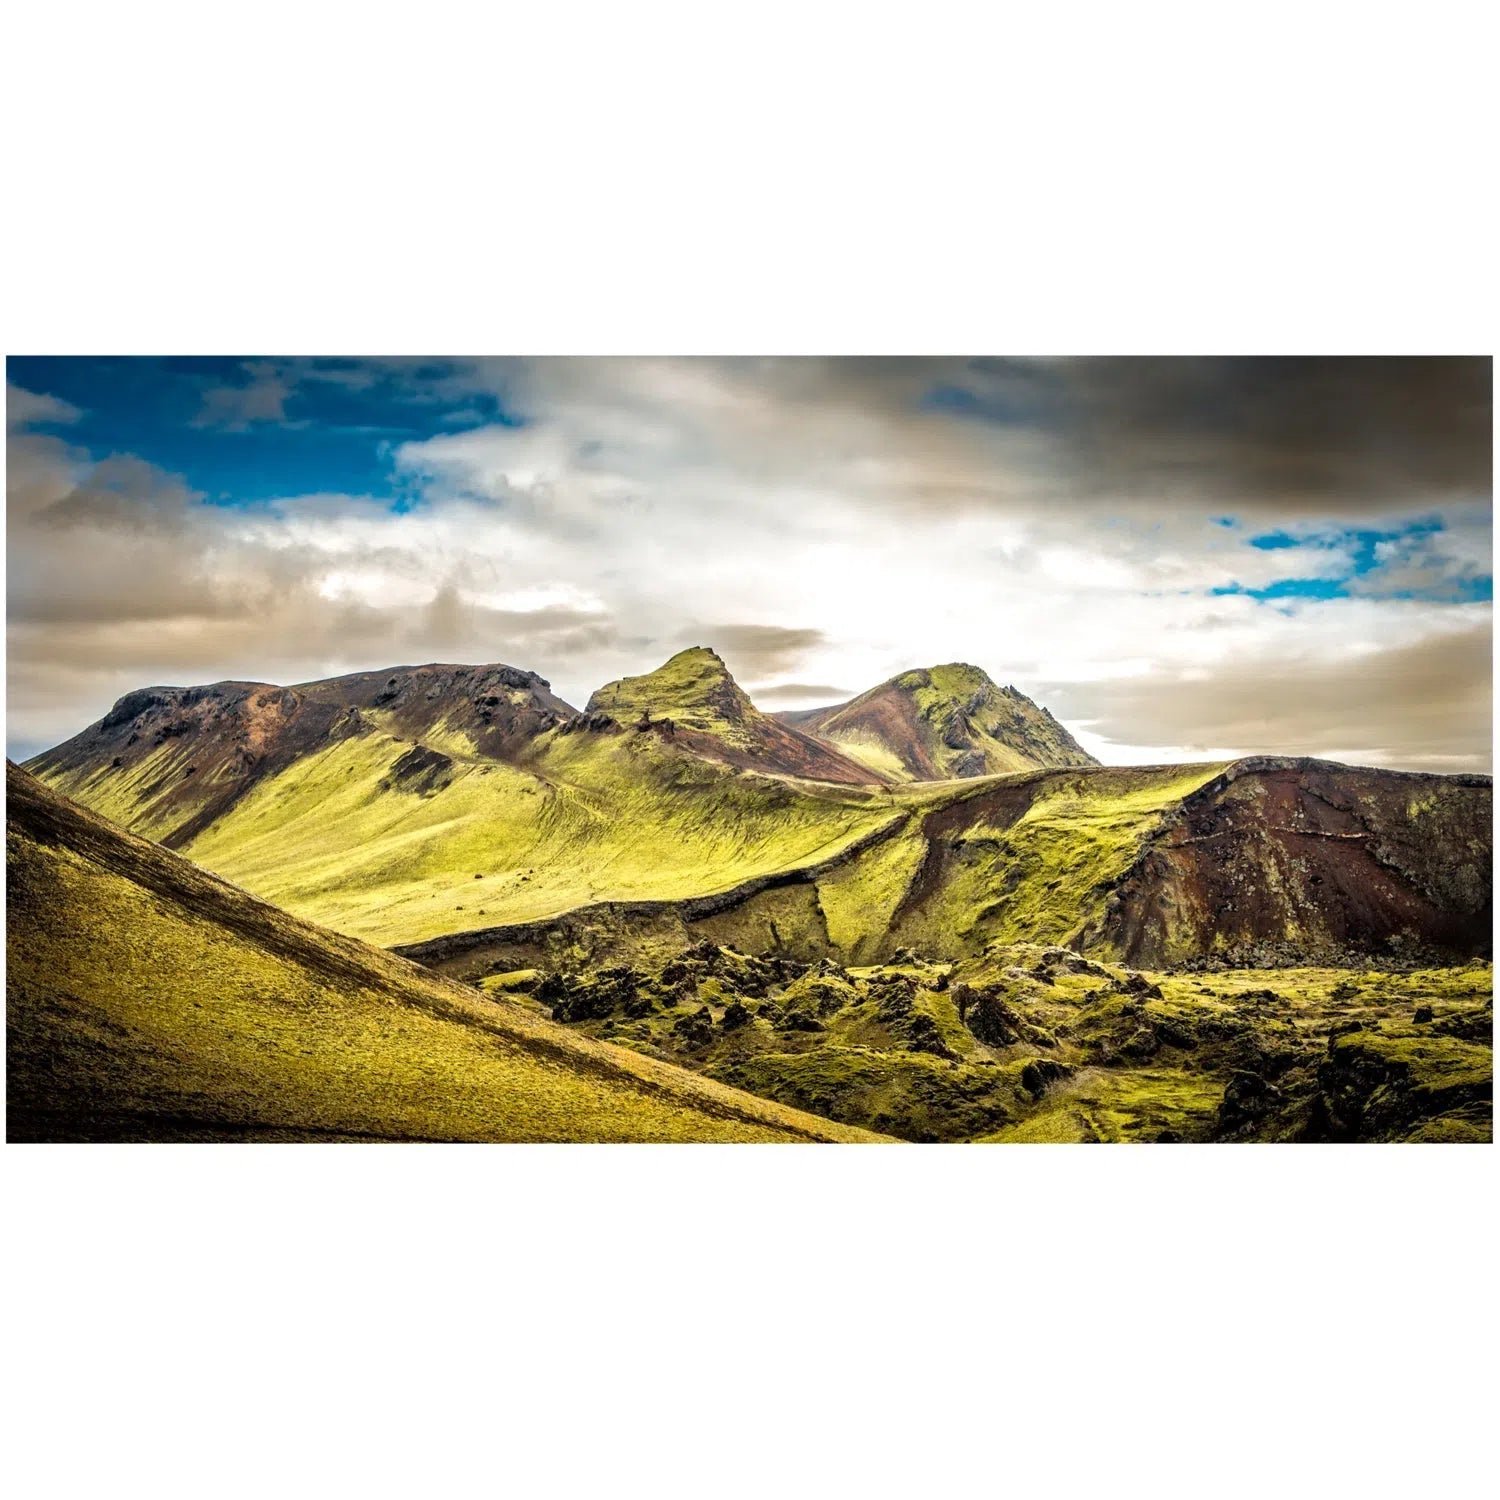 Mountains in iceland-Imagesdartistes